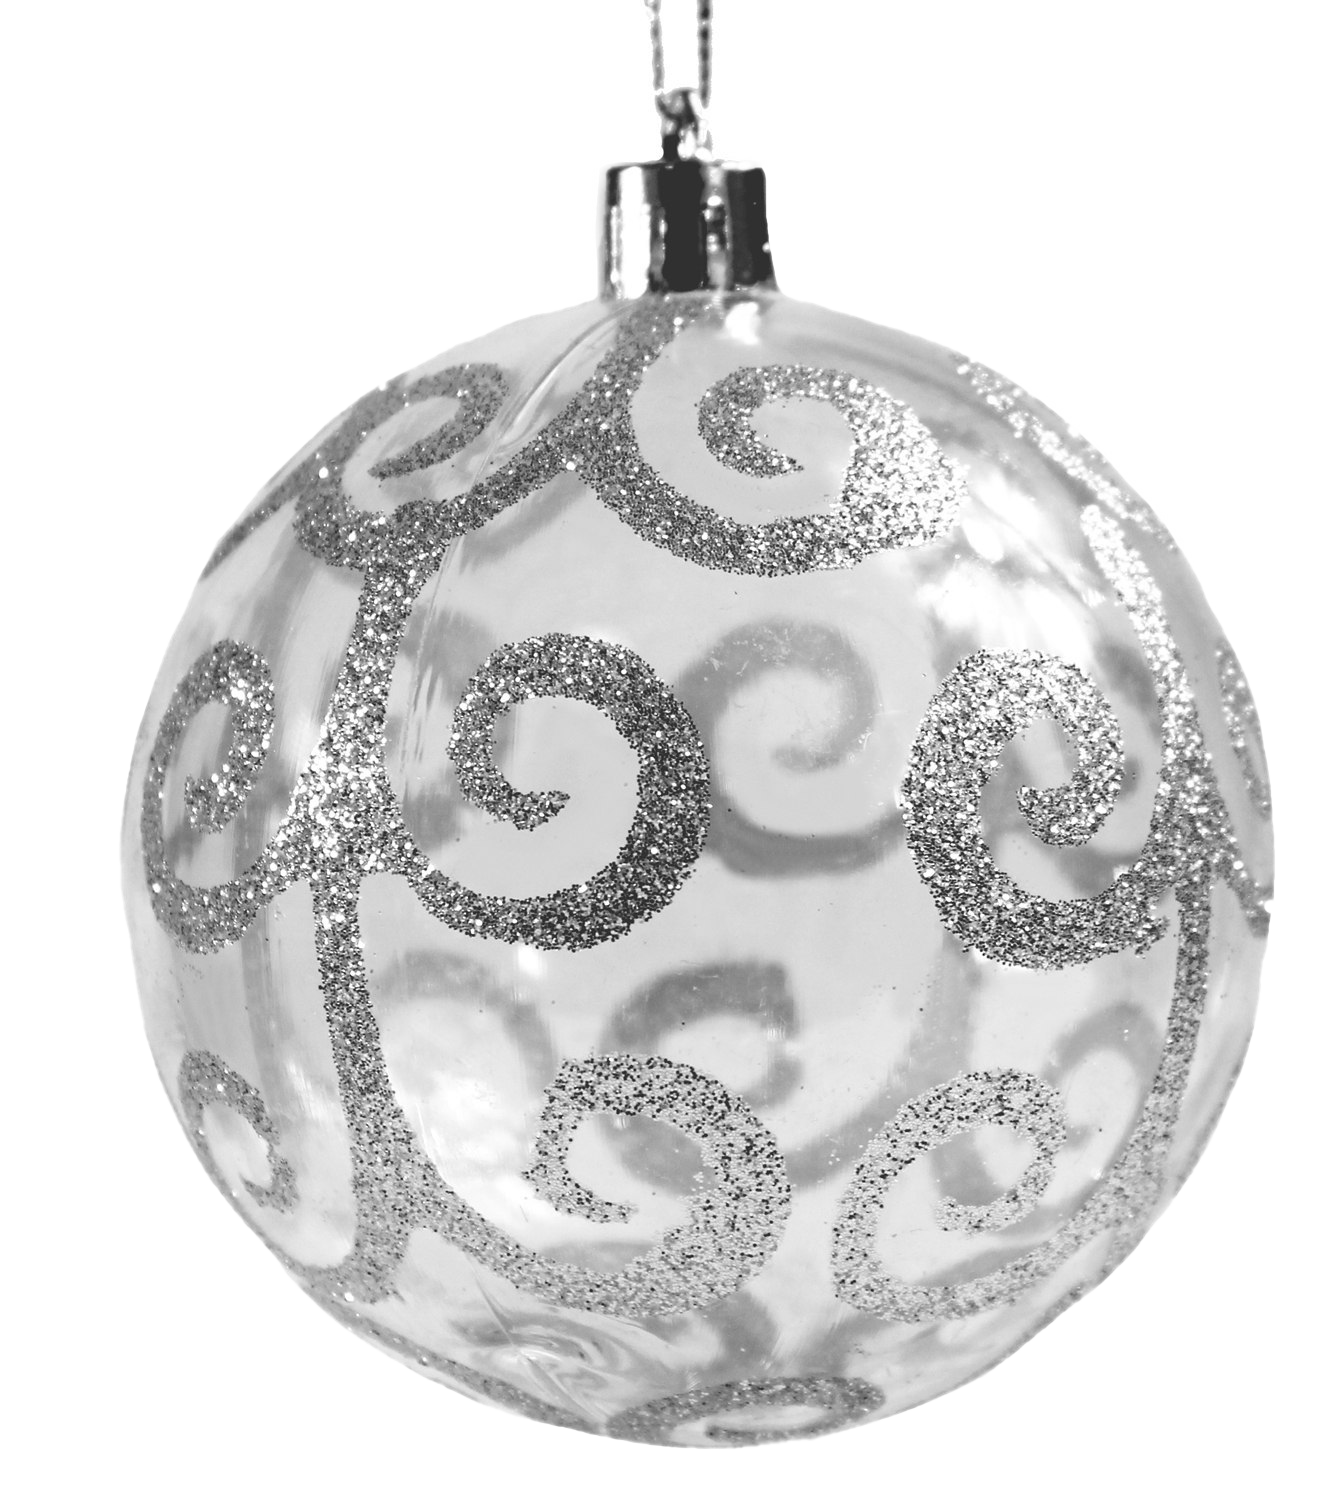 Download PNG image - Silver Christmas Ornaments Transparent Background 